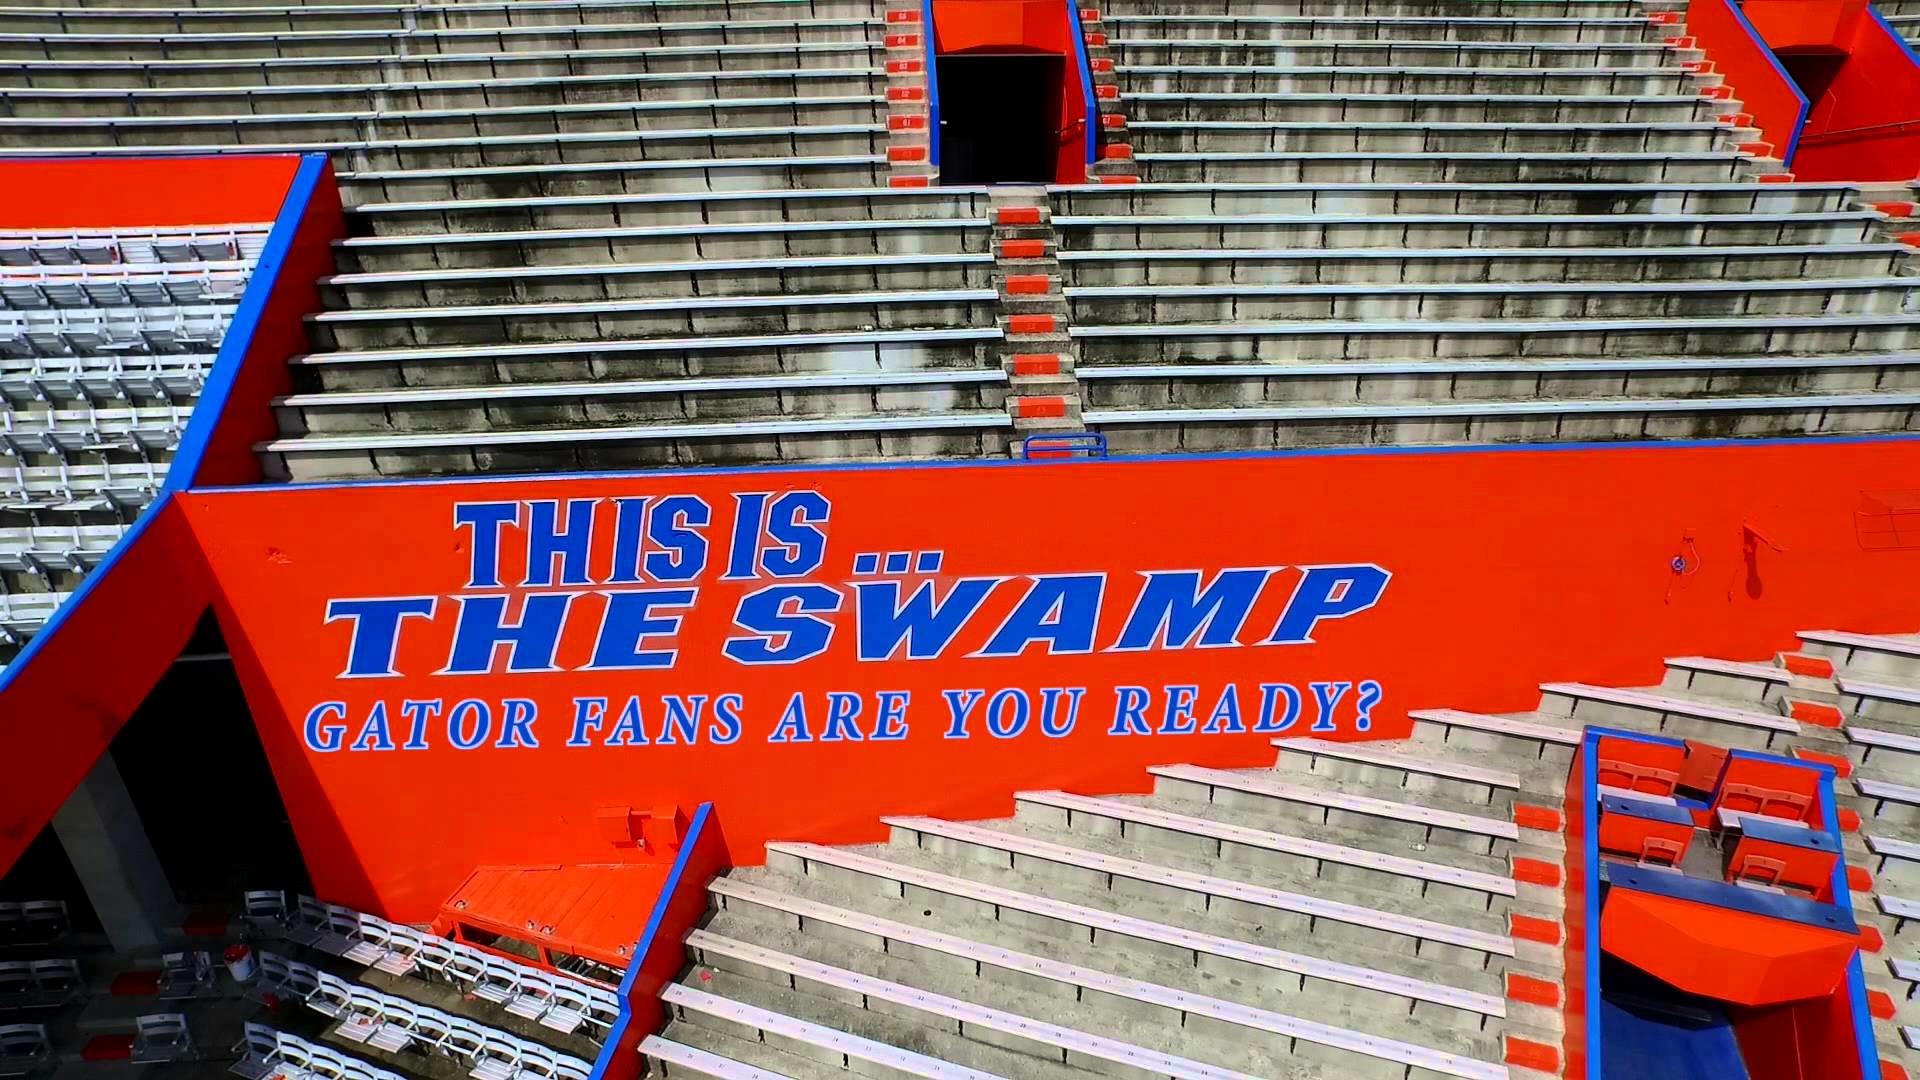 1920x1080 This Is The Swamp - University of Florida Gator Football Time